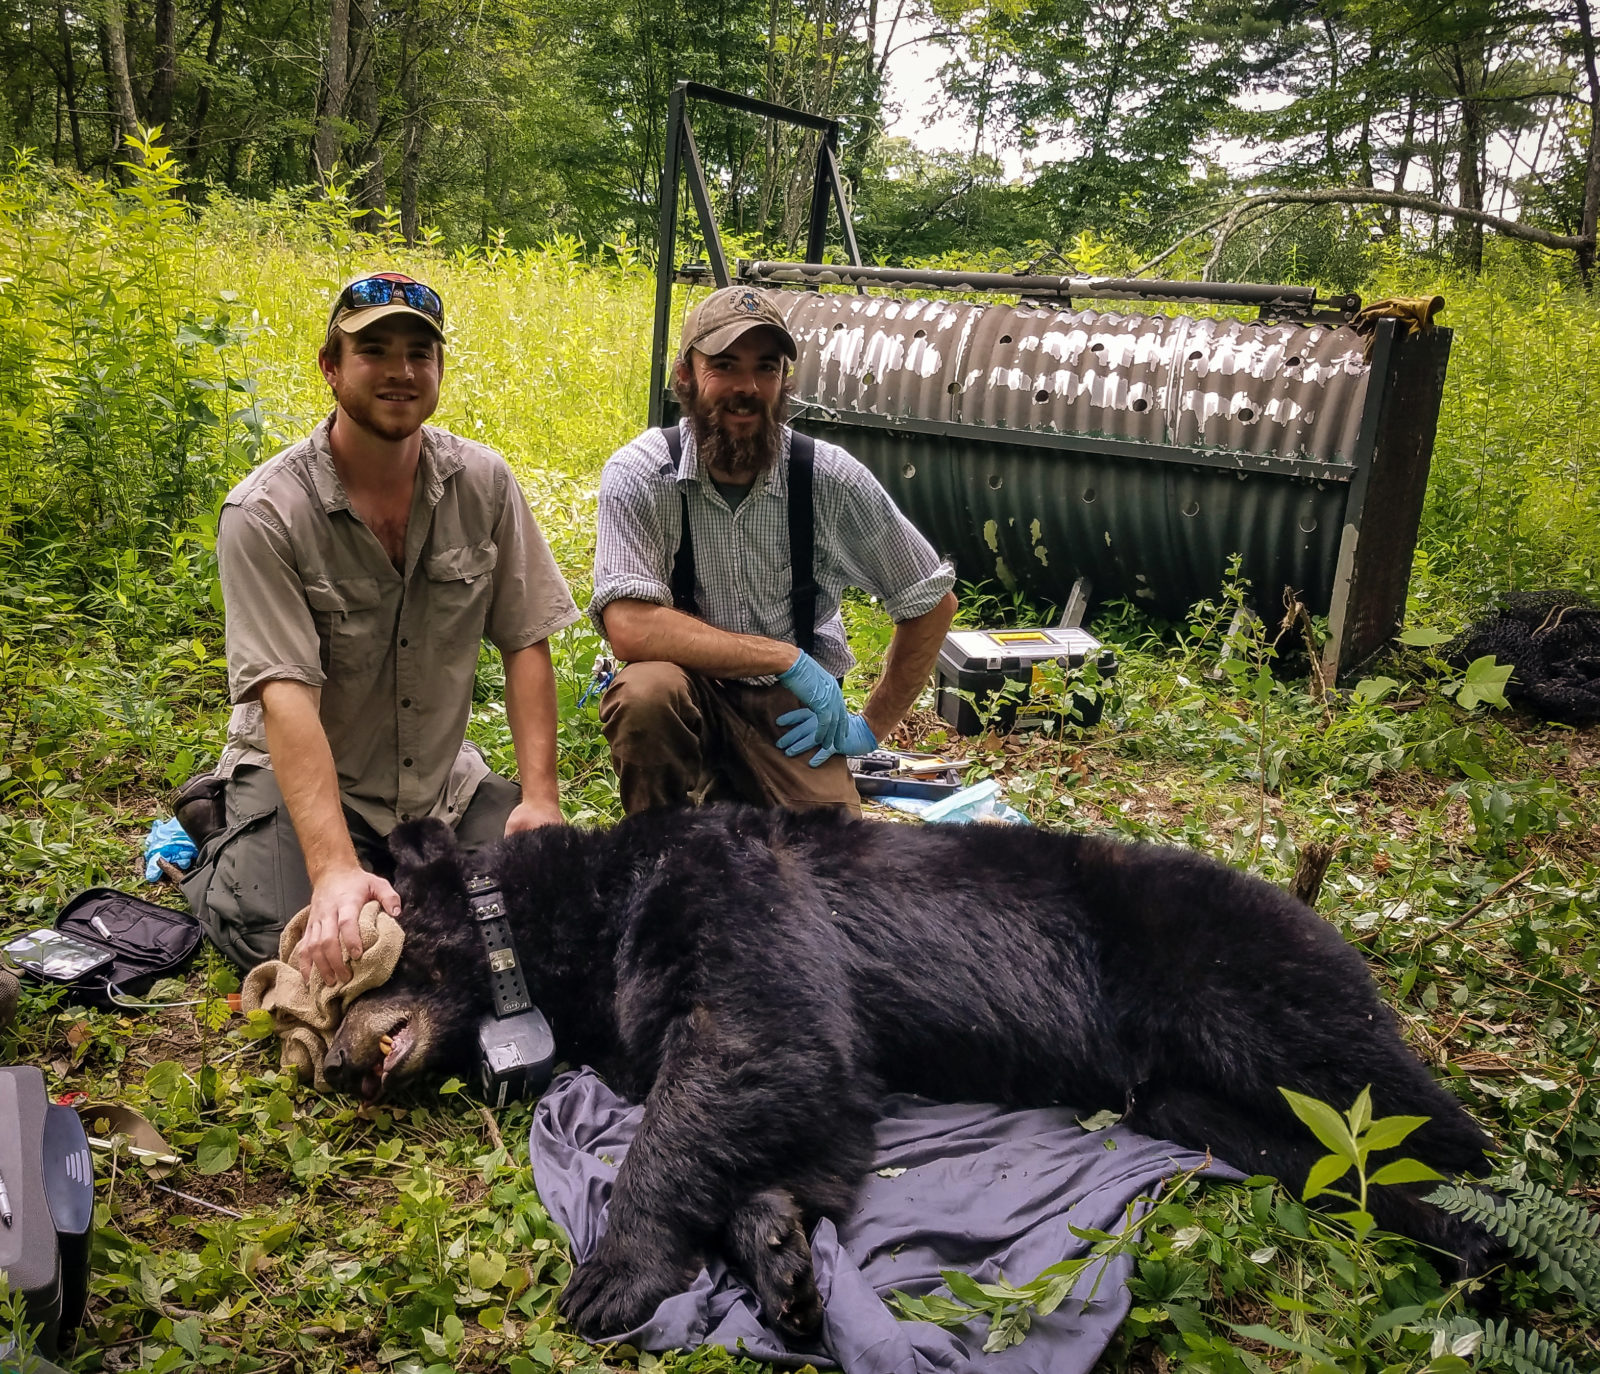 Two field biologists posing next to a black bear they have caught and placed a GPS collar on